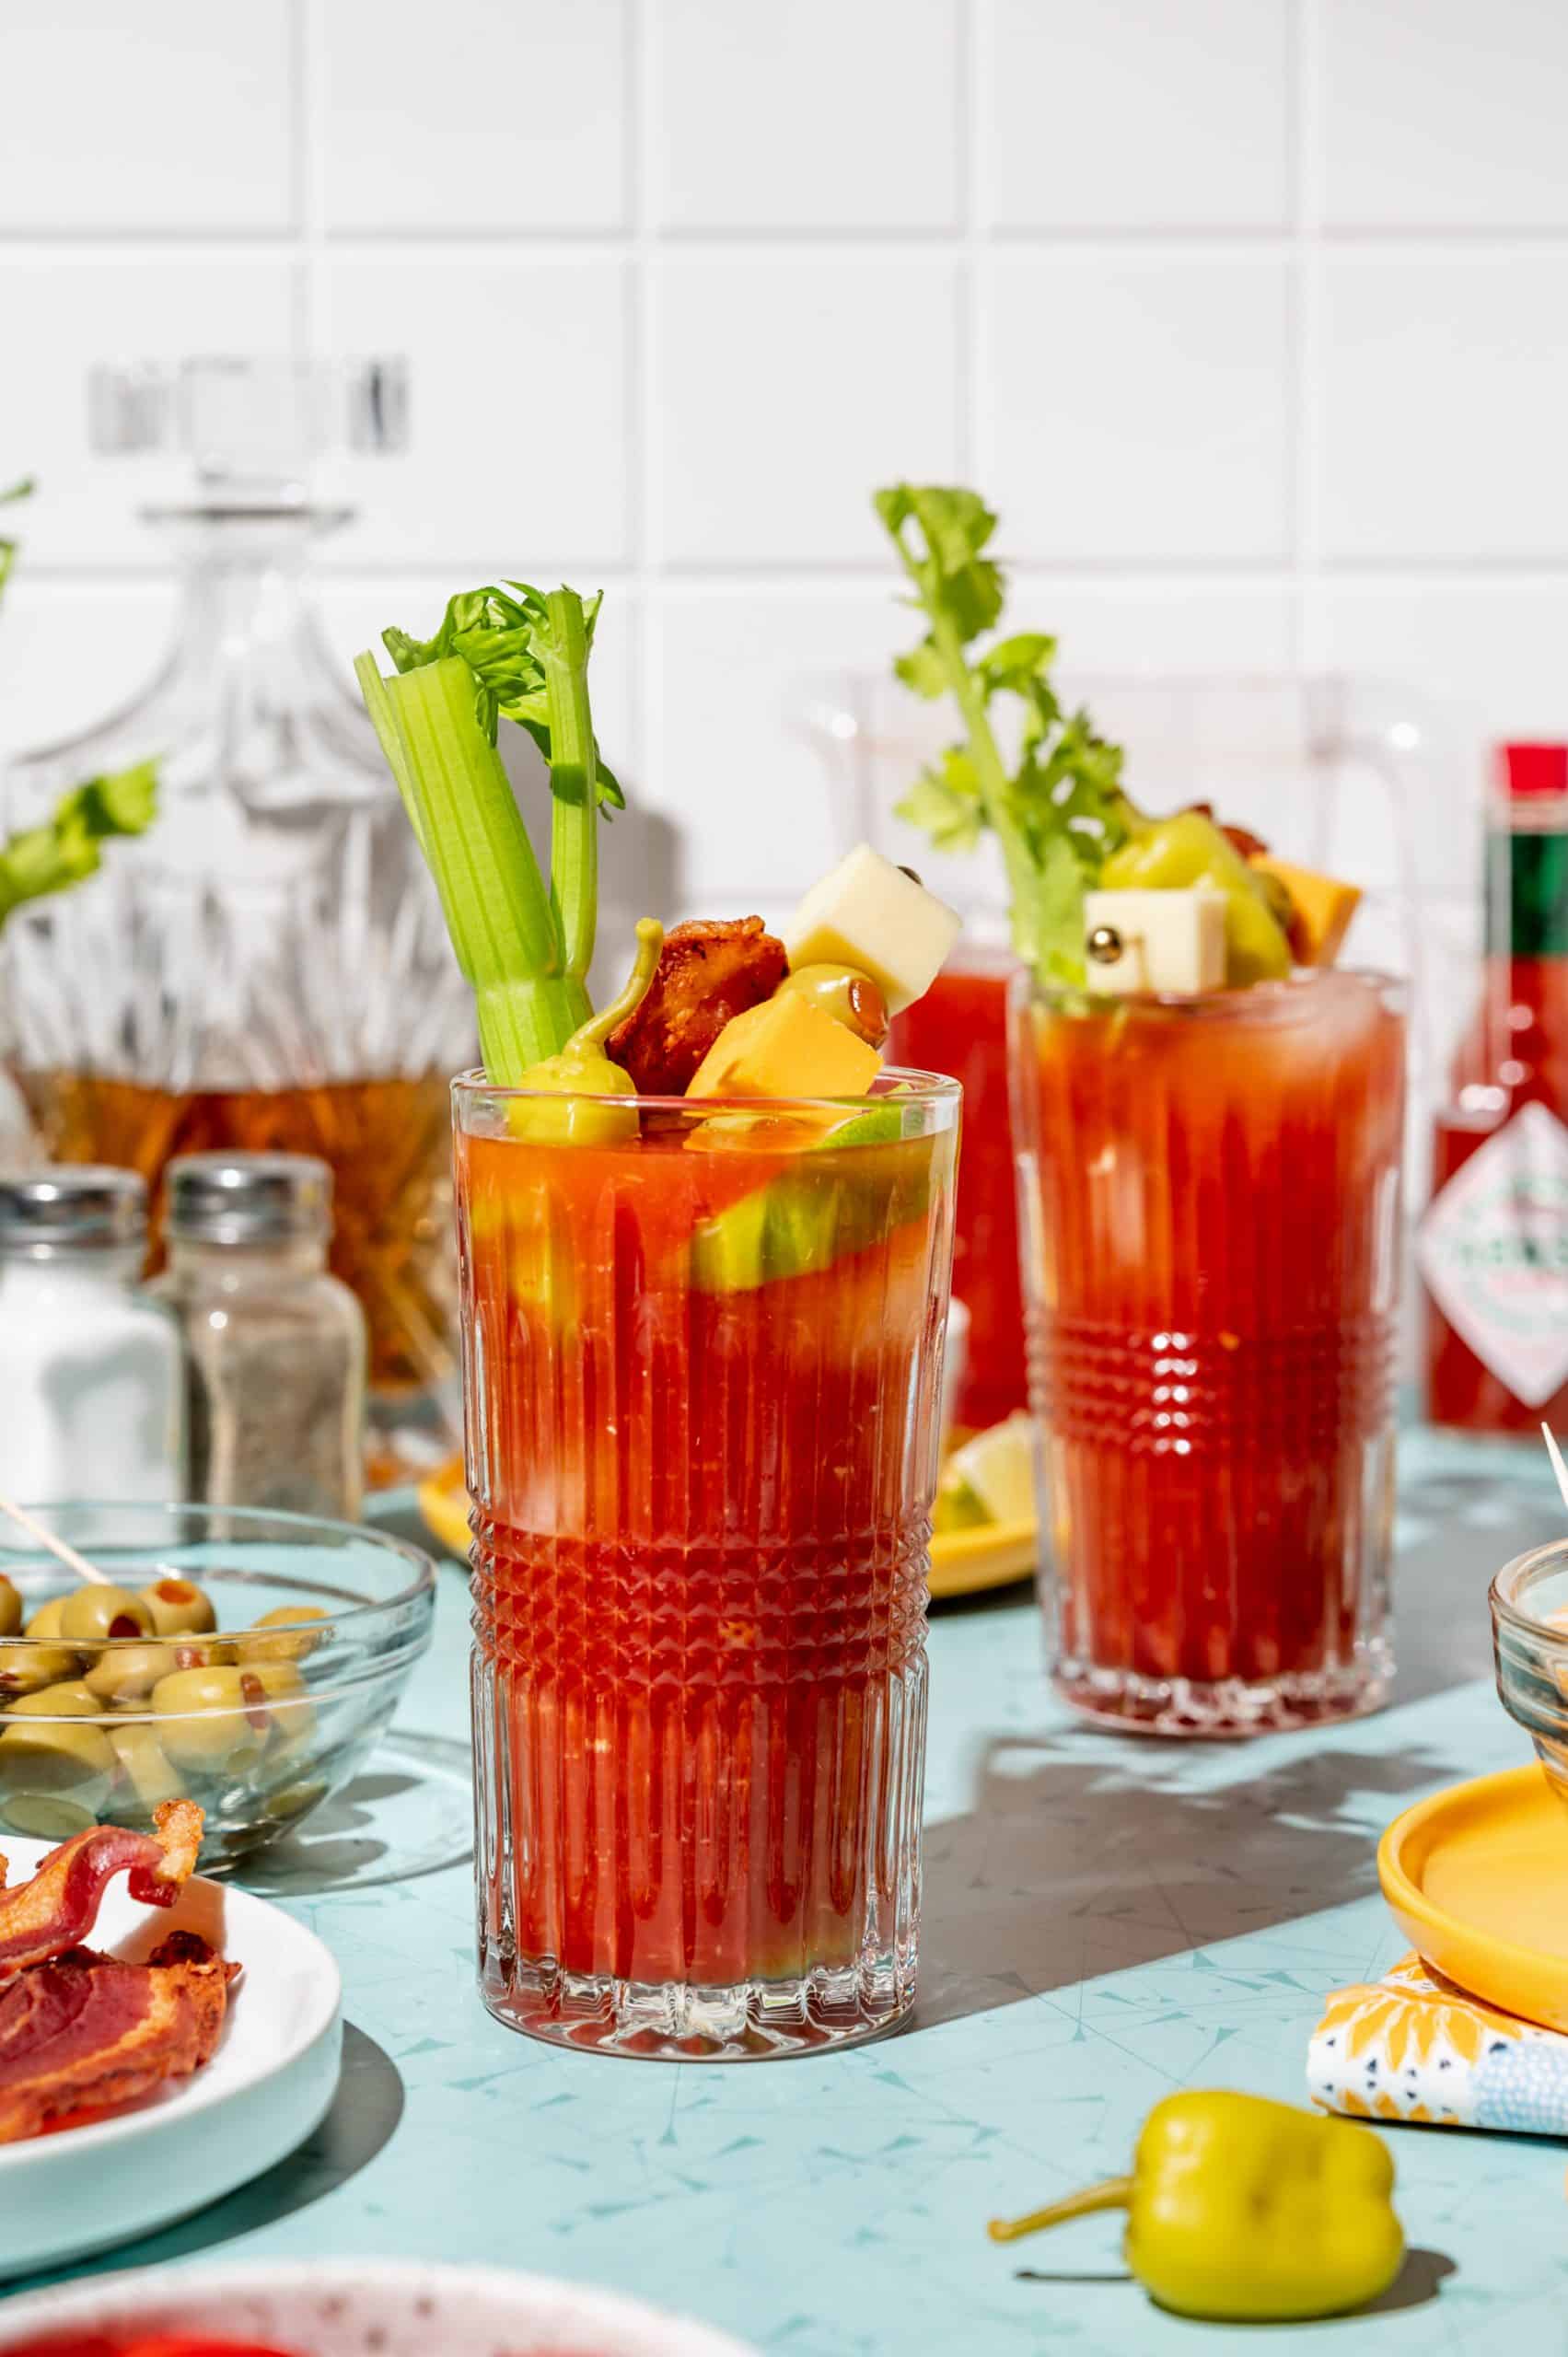 Two bloody mary cocktails with bacon, celery, and other garnishes